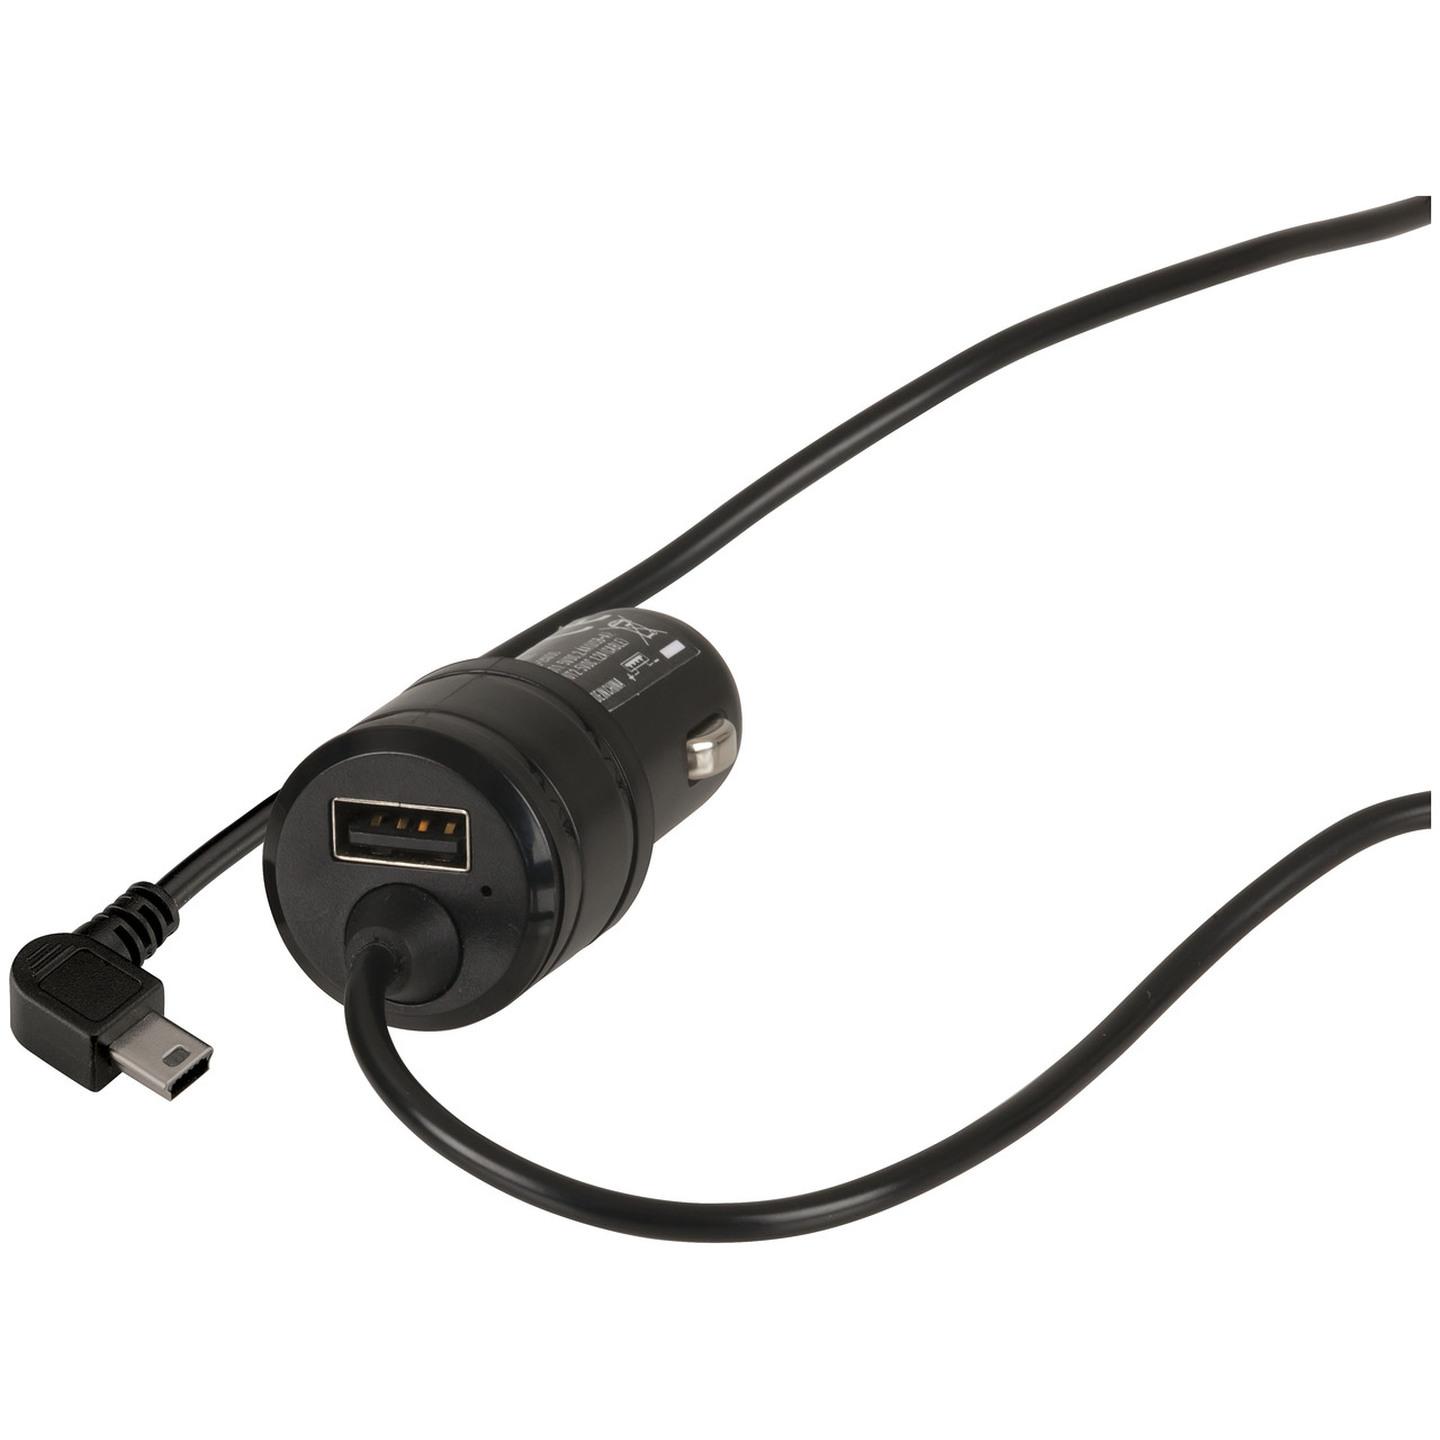 In-Car Charger for Dash Camera and GPS Navigation